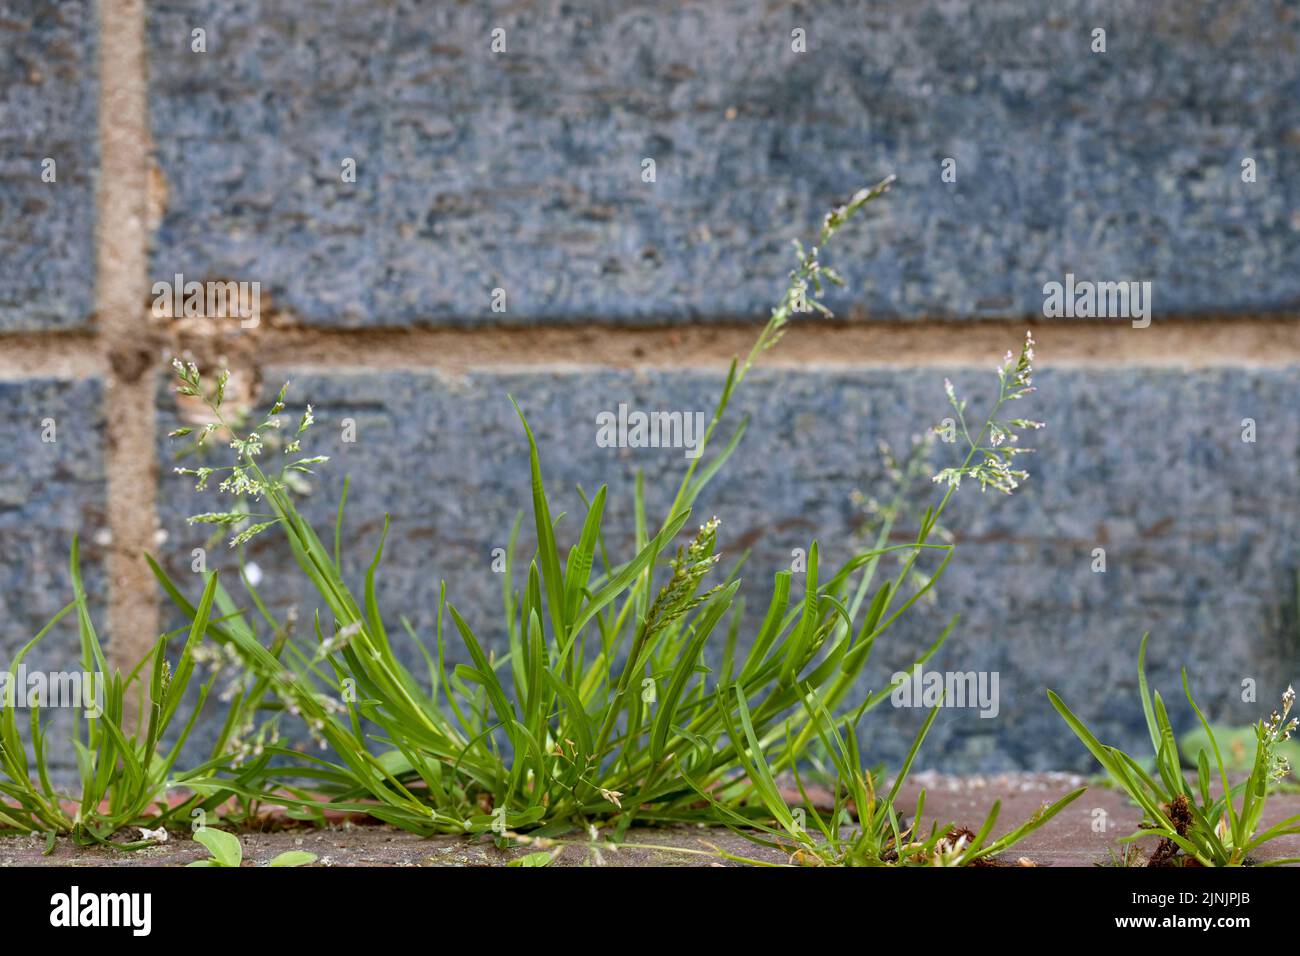 annual blue-grass, annual meadow-grass, low spear grass (Poa annua), grows in paving gaps, Germany Stock Photo